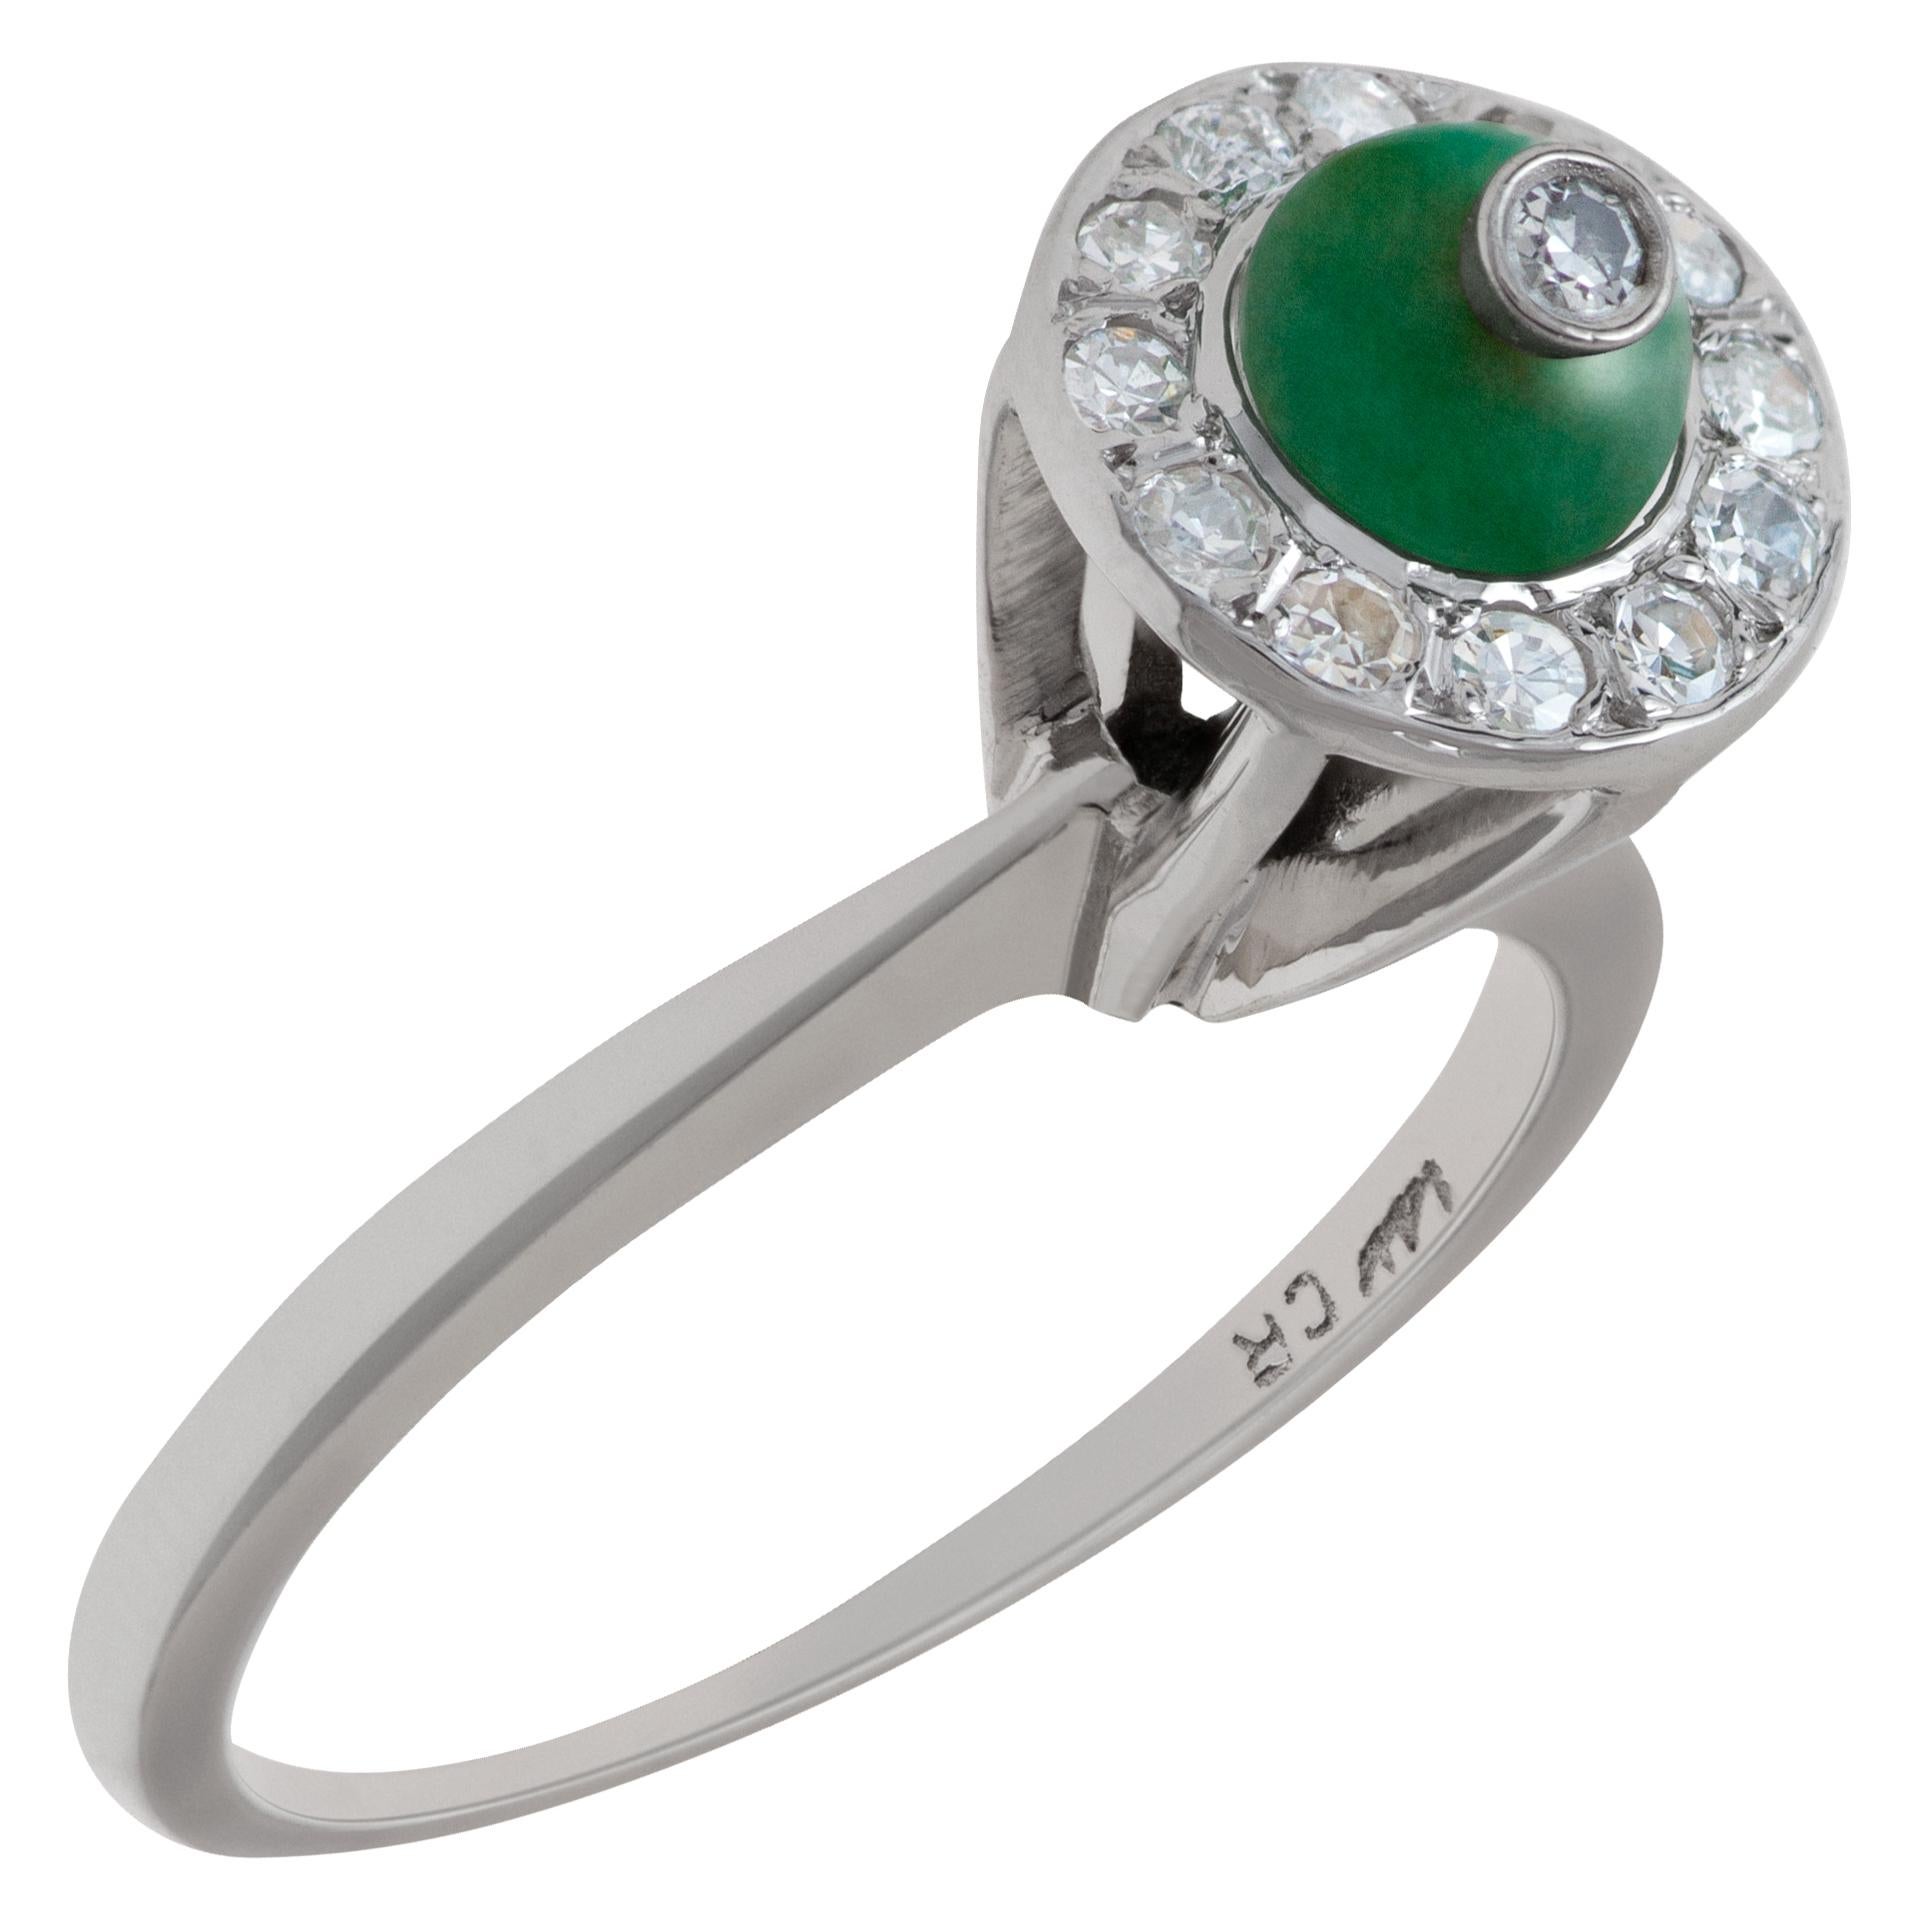 Diamond and Jade Ring in 14k White Gold In Excellent Condition For Sale In Surfside, FL